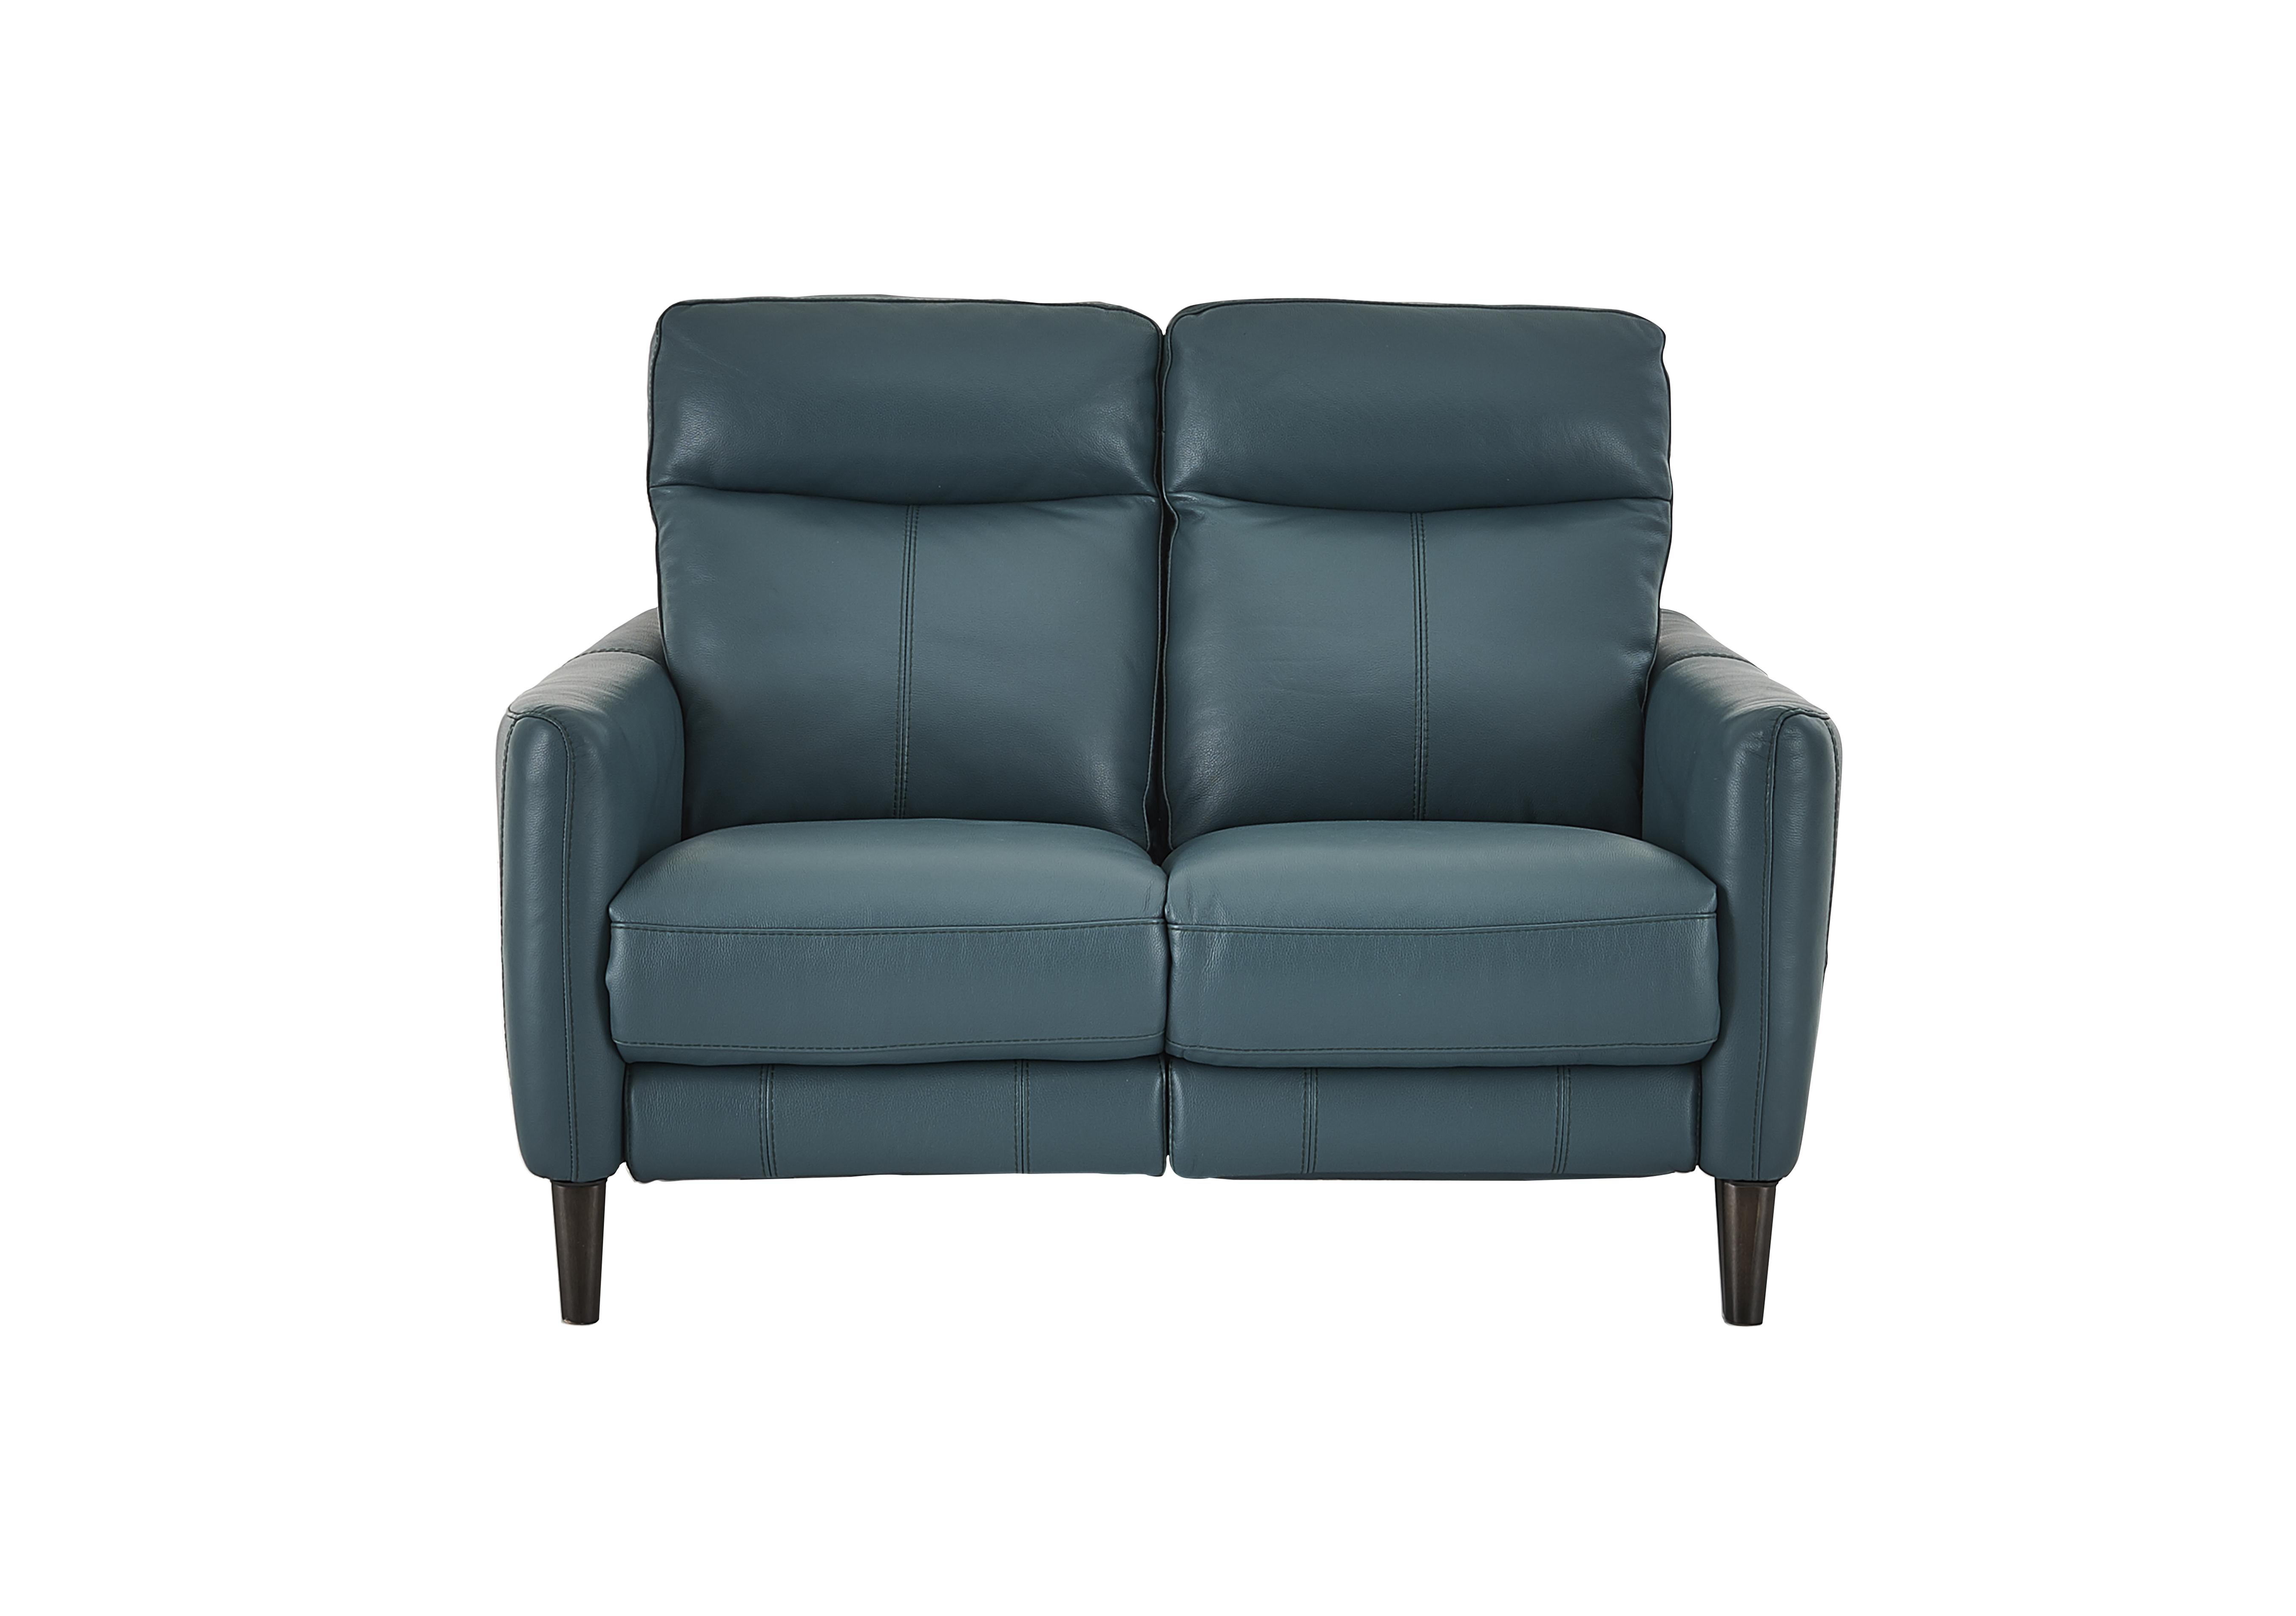 Compact Collection Petit 2 Seater Leather Sofa in Bv-301e Lake Green on Furniture Village